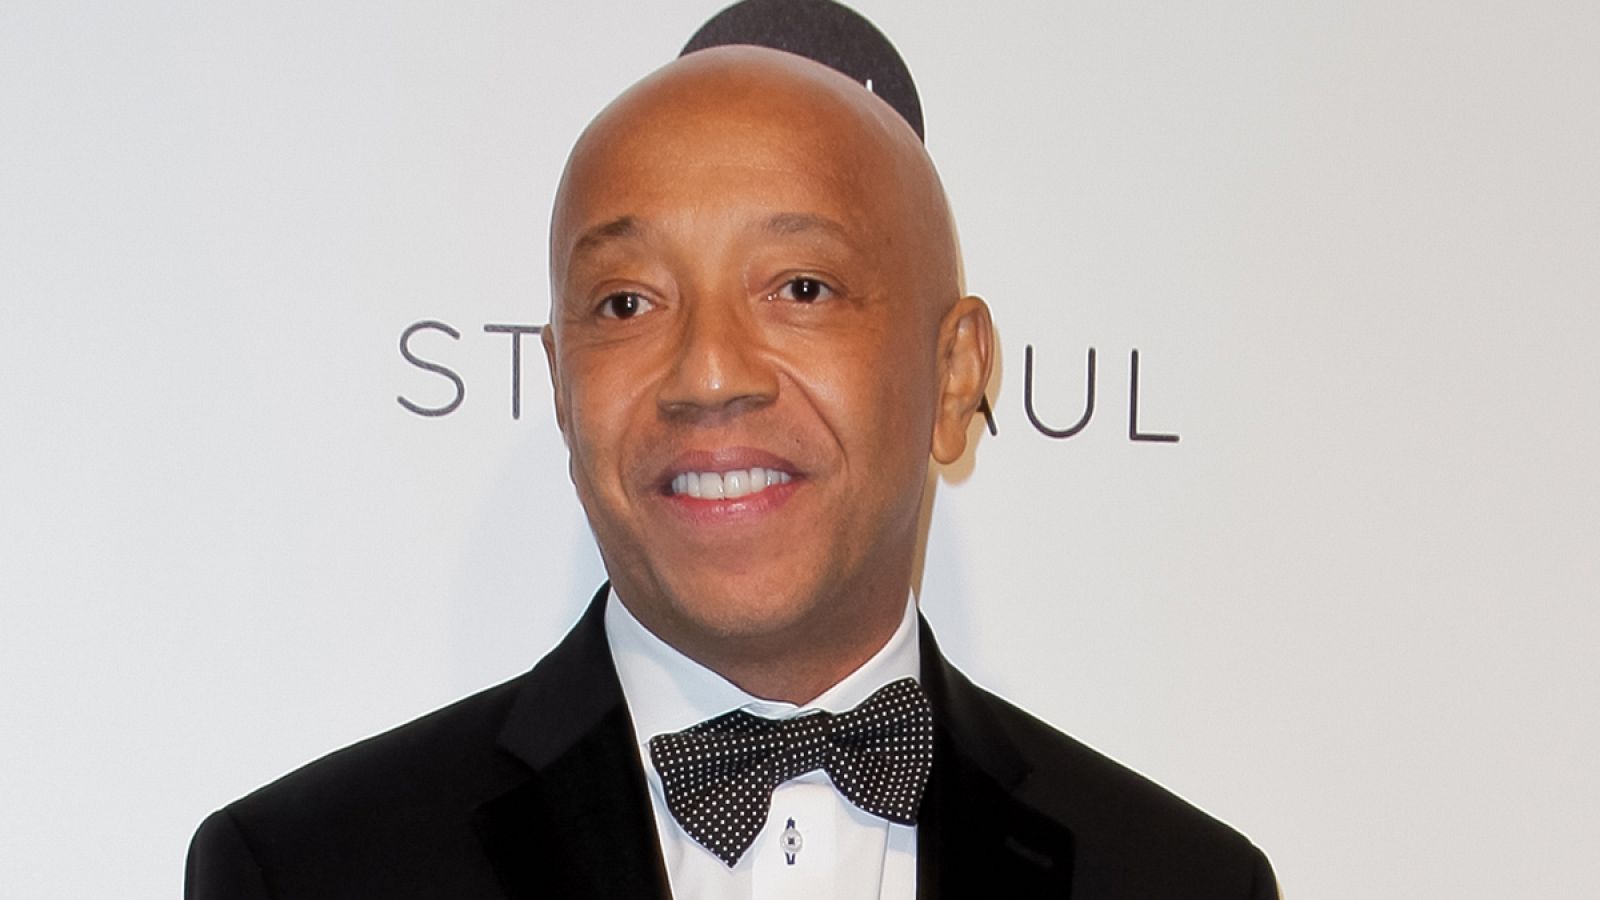 El productor musical Russell Simmons.